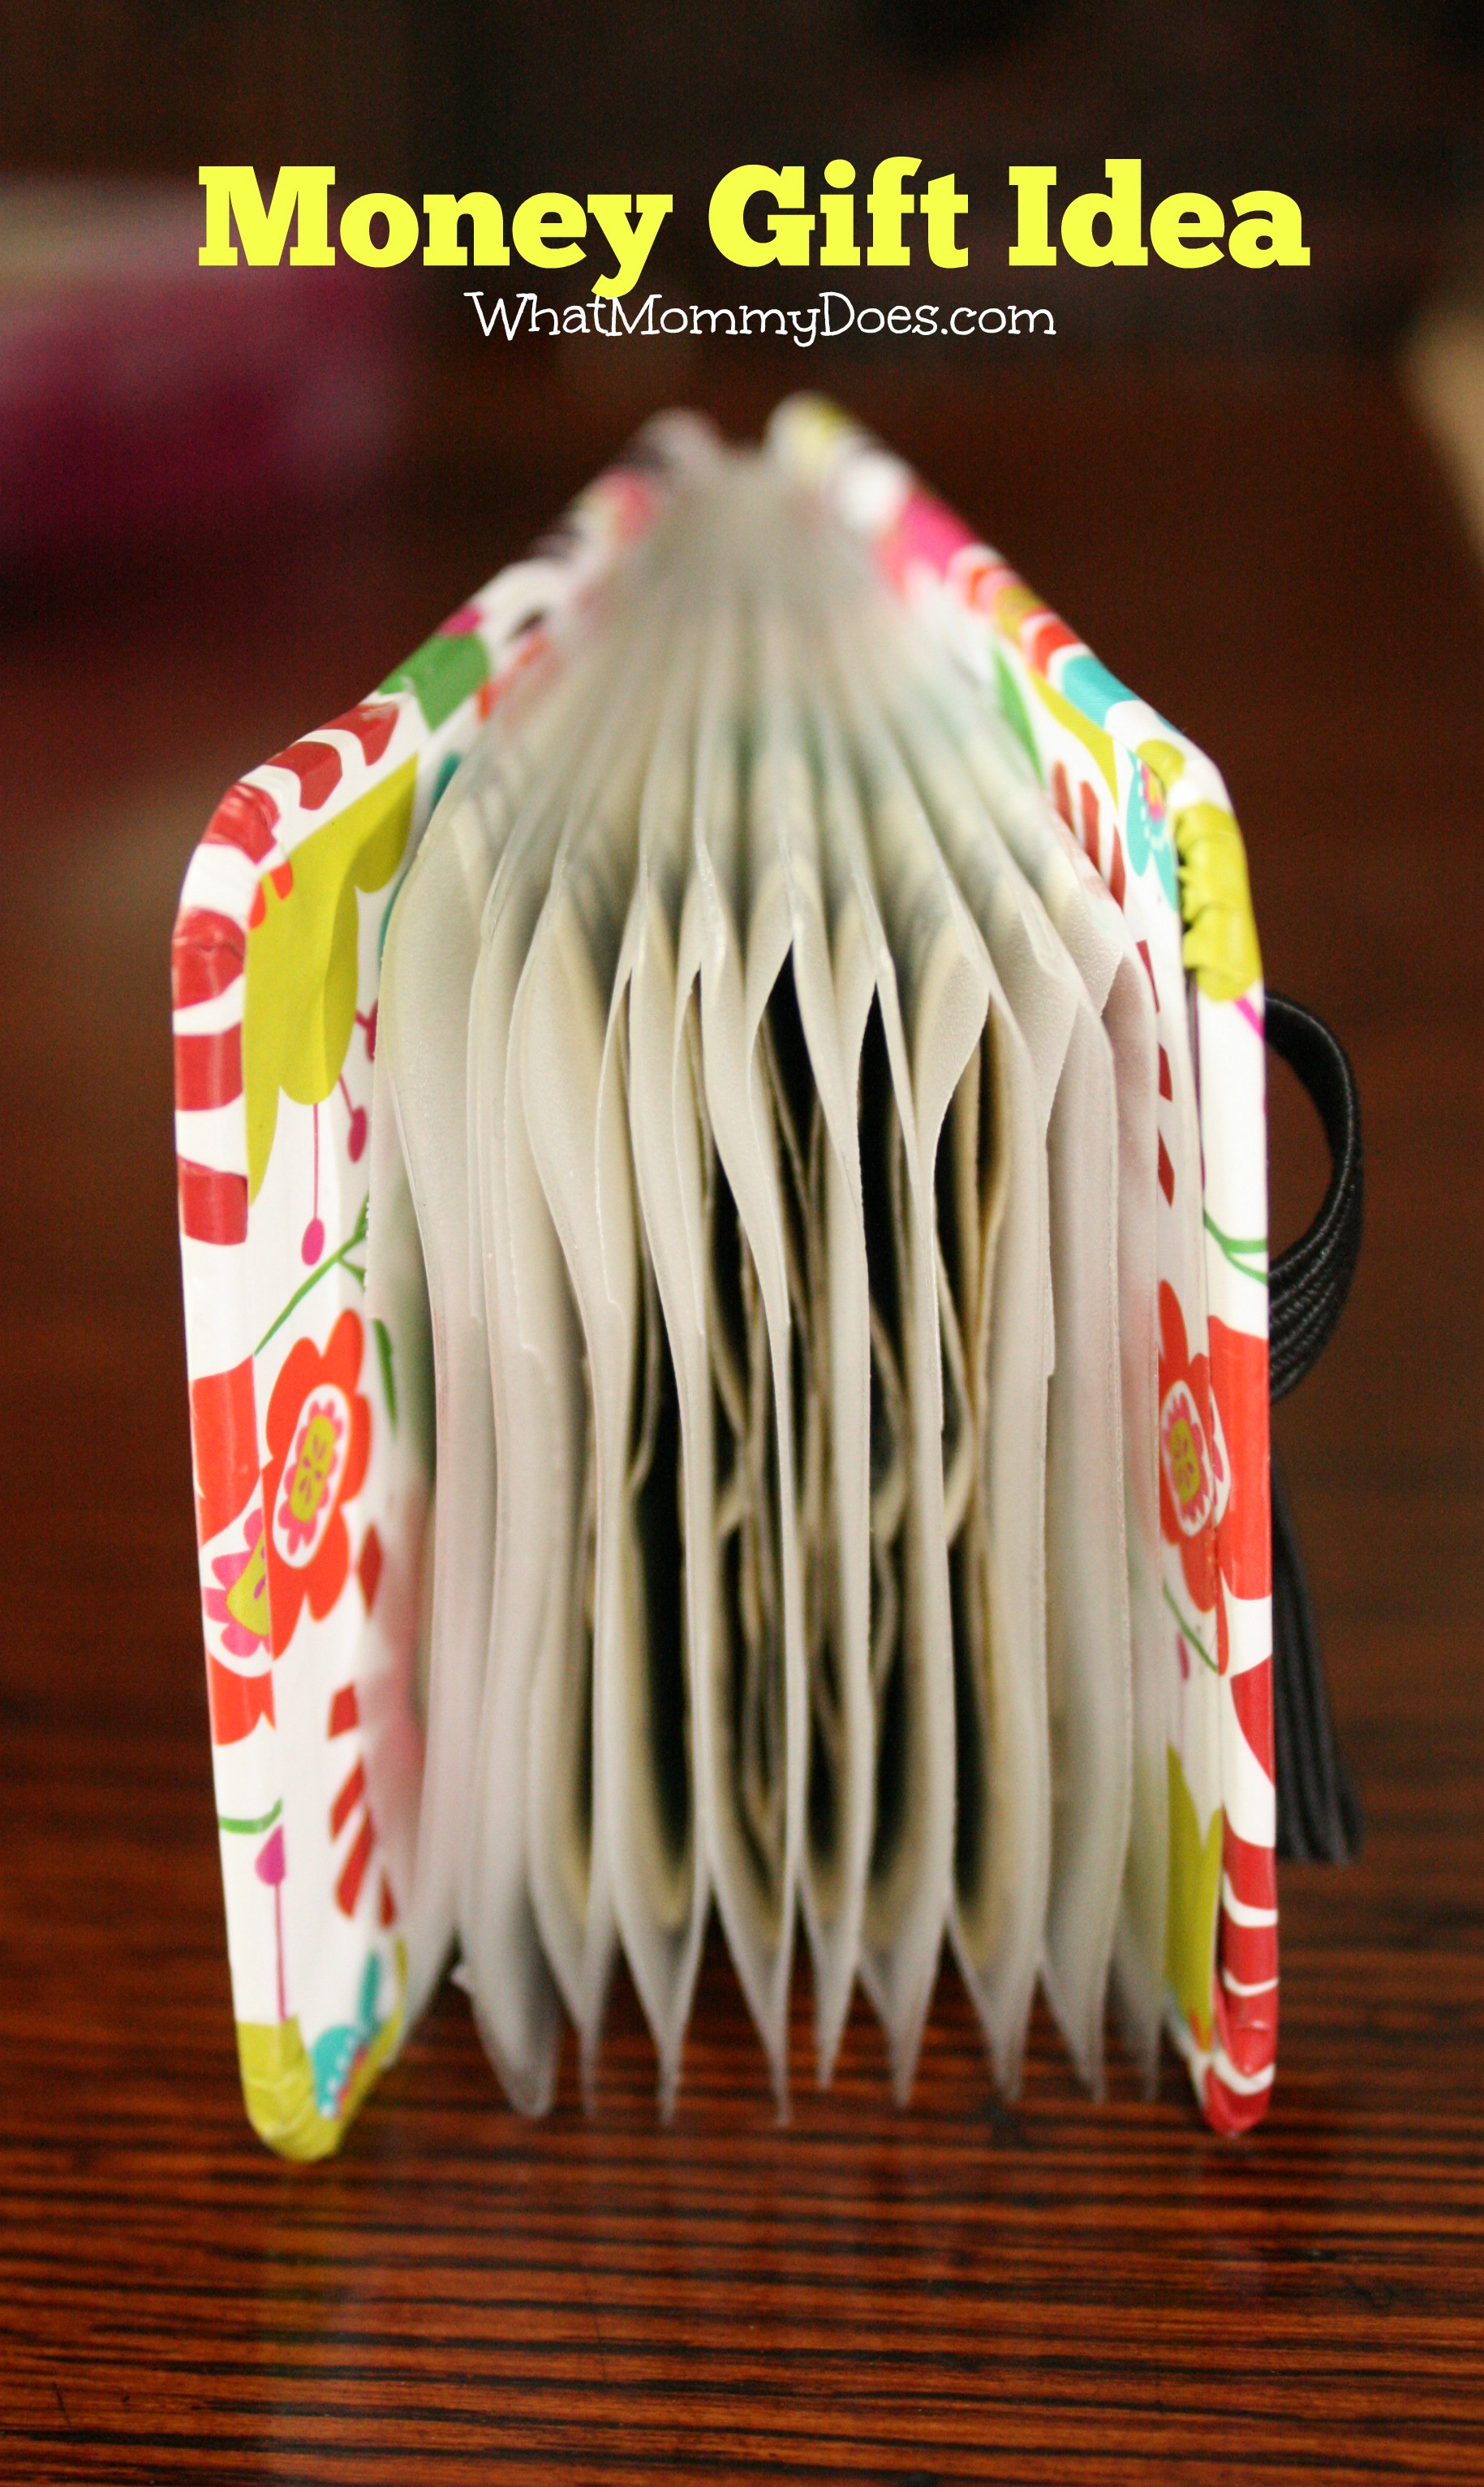 Money Gift Ideas For Christmas
 7 Creative Money Gift Ideas What Mommy Does